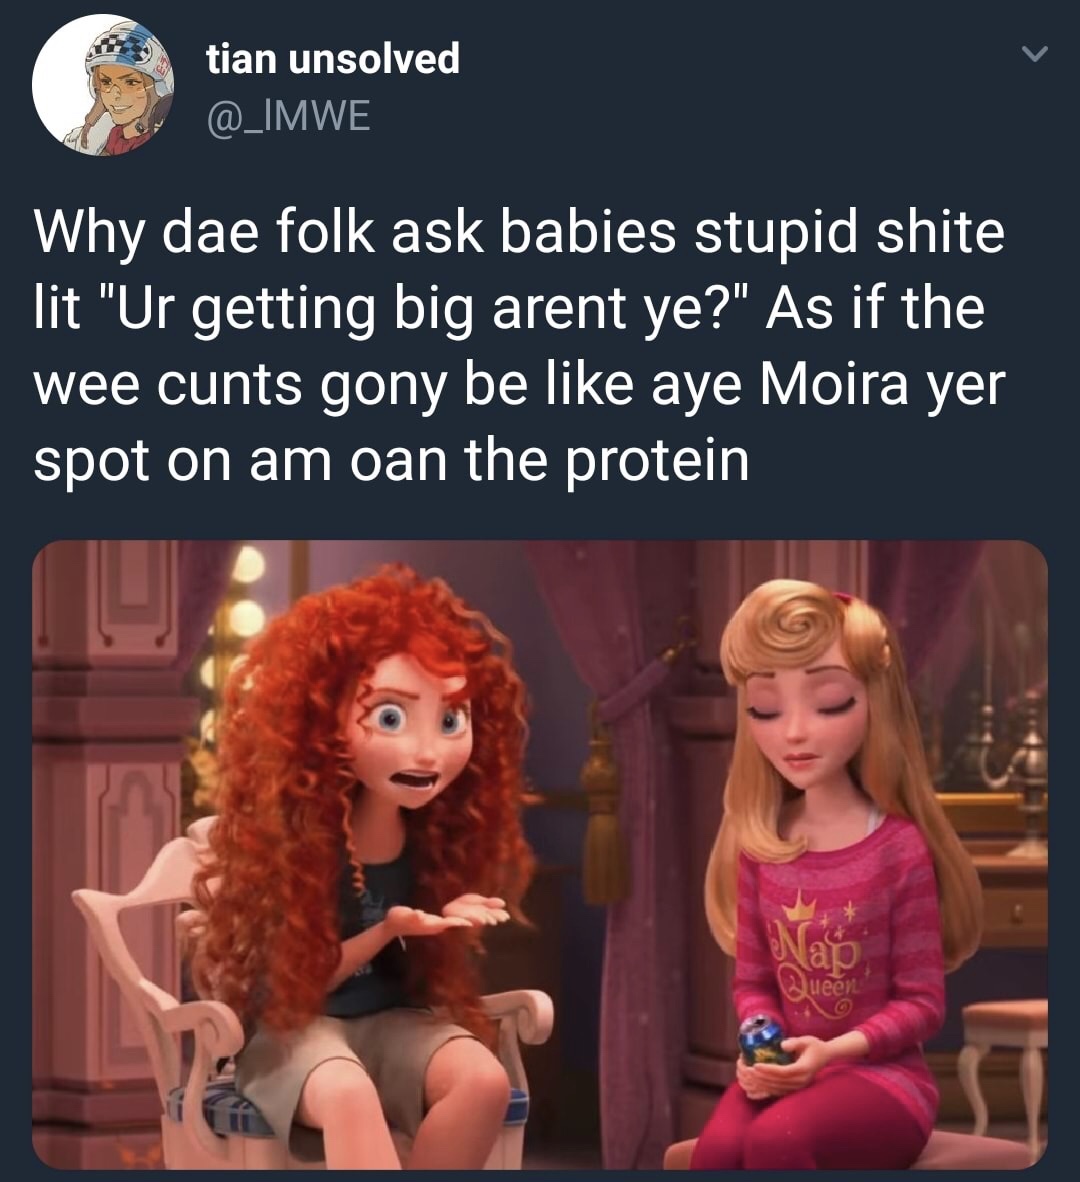 memes - merida scottish people twitter - tian unsolved Why dae folk ask babies stupid shite lit "Ur getting big arent ye?" As if the wee cunts gony be aye Moira yer spot on am oan the protein ueer